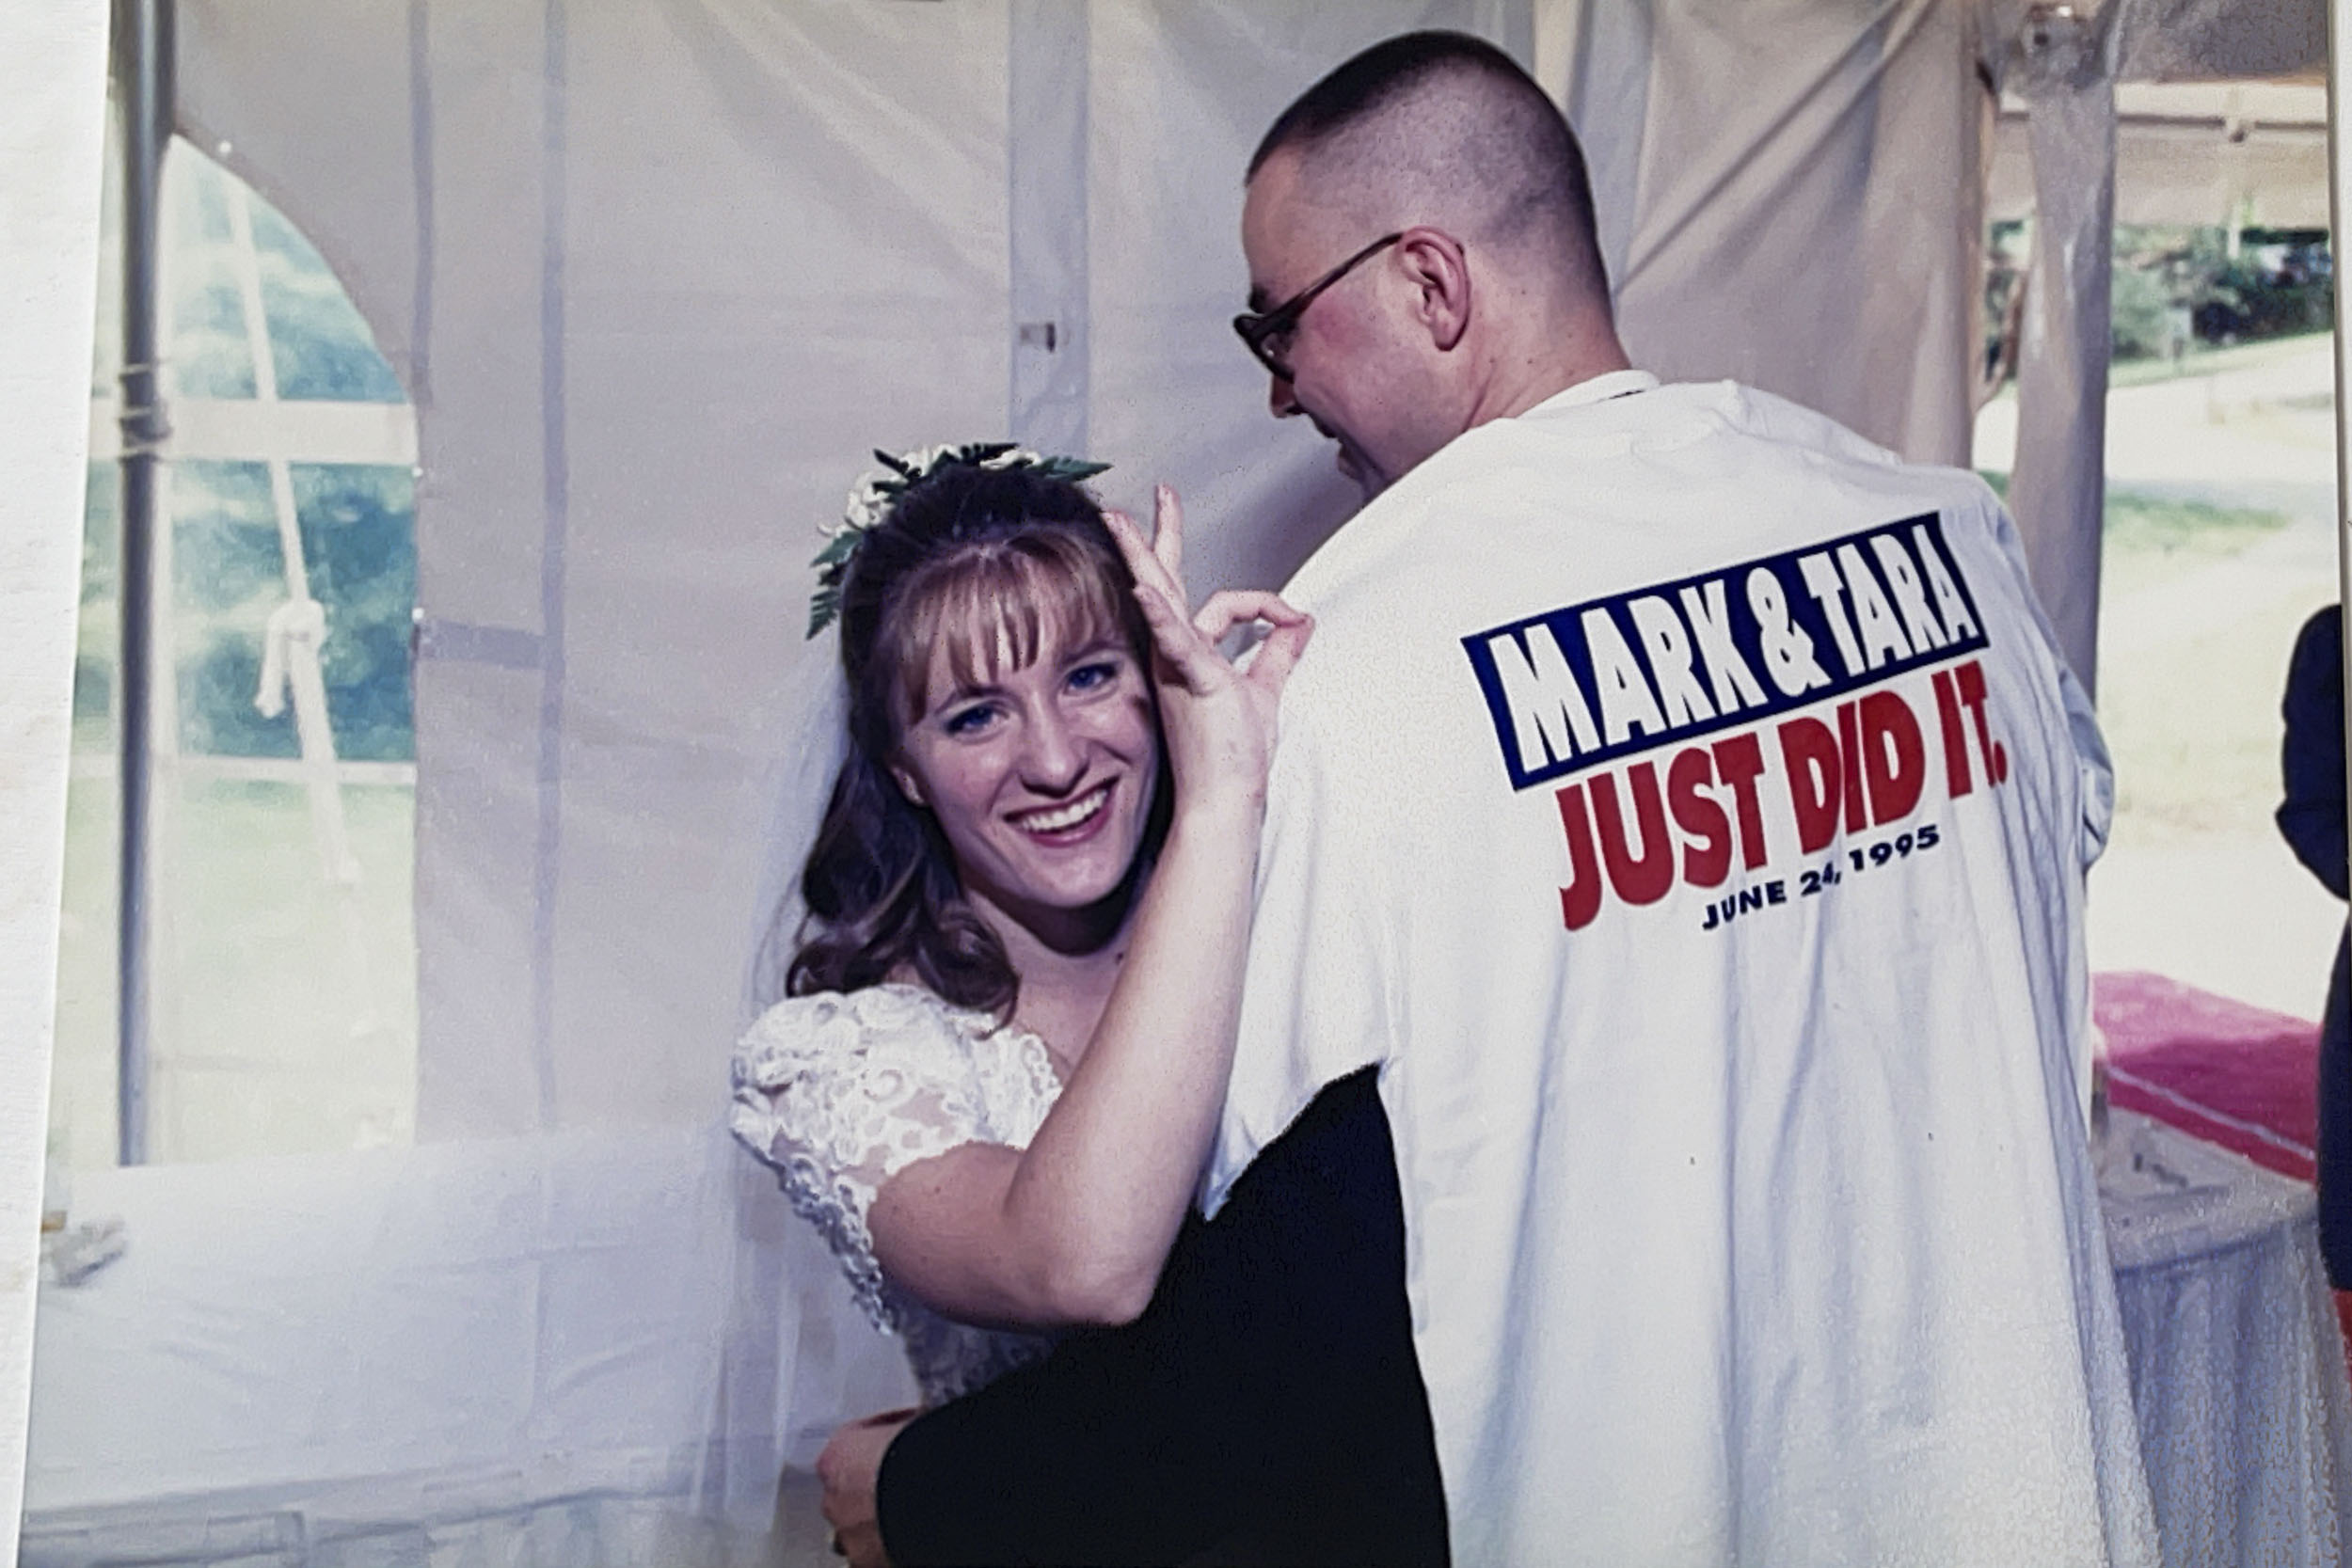 Tara, left, and Mark Mincer, right at their wedding in 1995